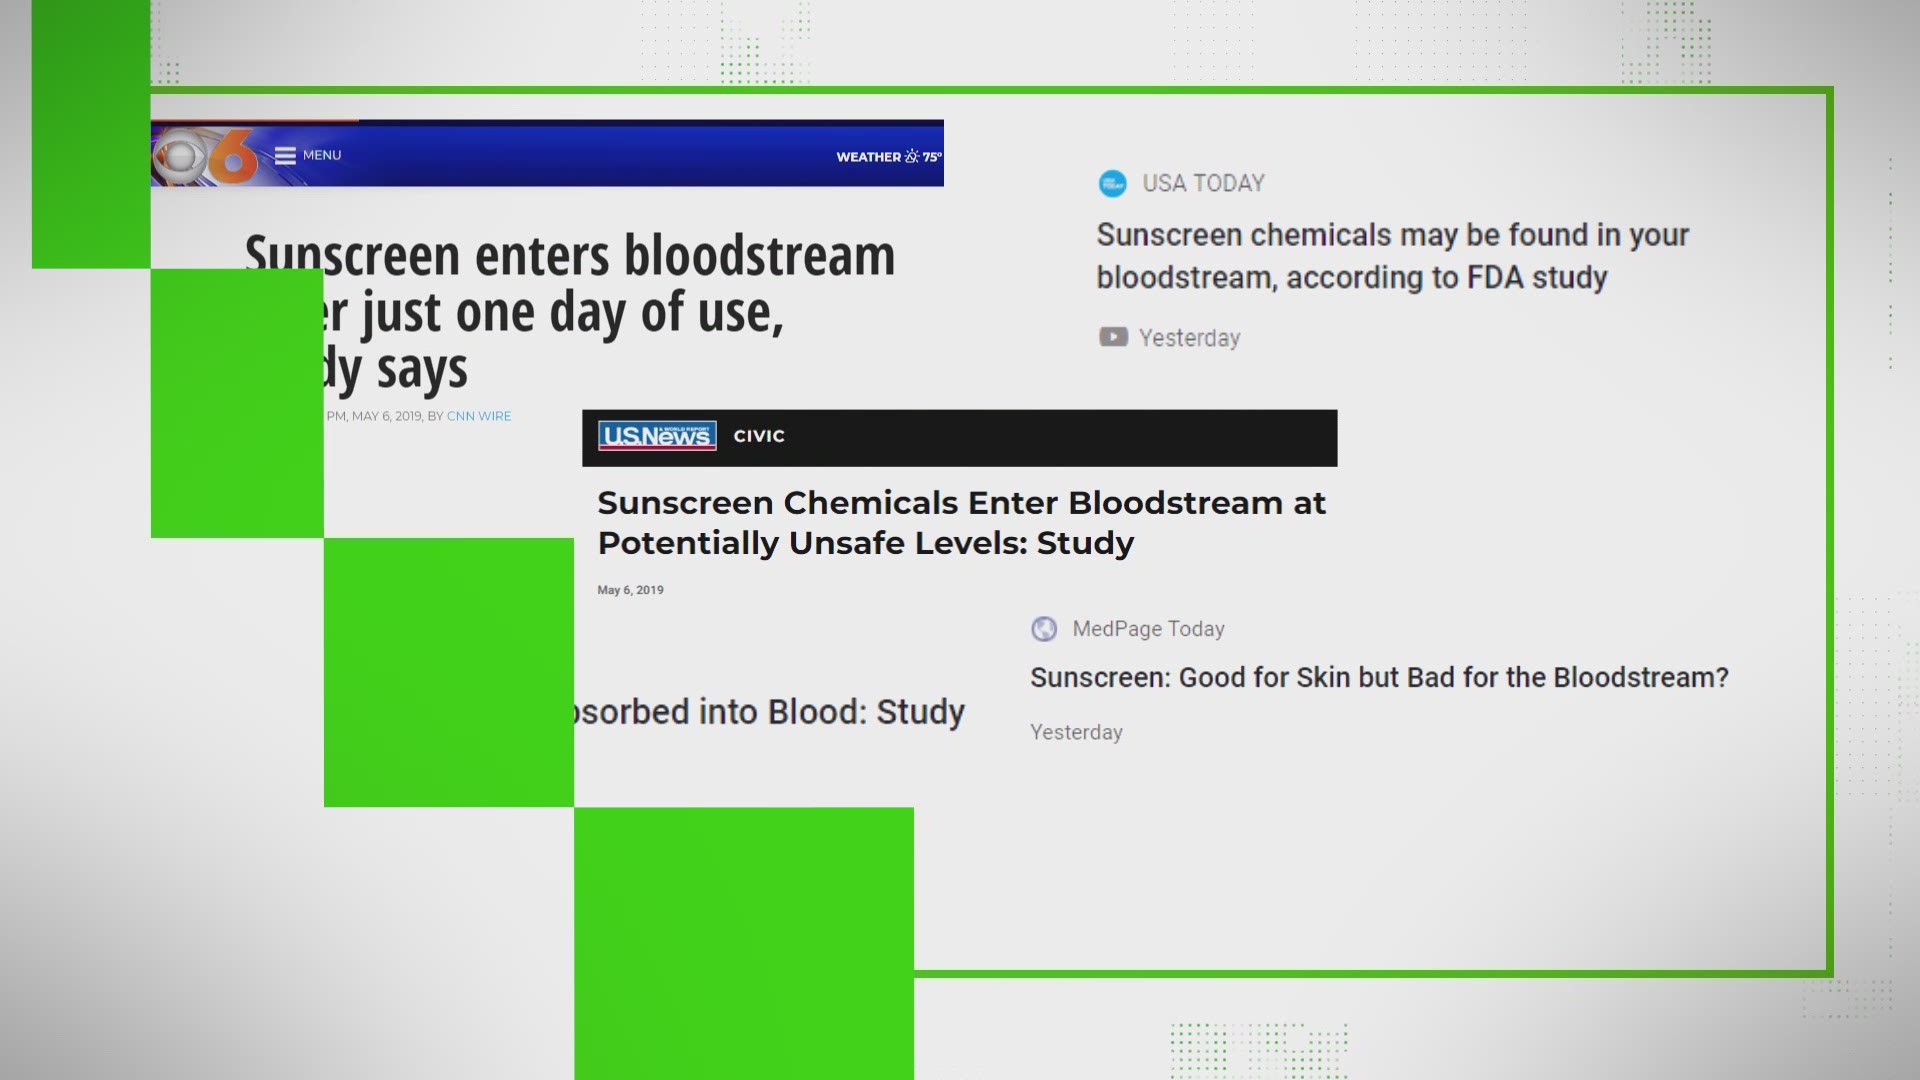 An alarming headline as we get ready for Summer - New research showing that chemicals in Sunscreen can enter the bloodstream after just one day of use. What does this all mean and is it even accurate?We’ve had our VERIFY team working to answer.